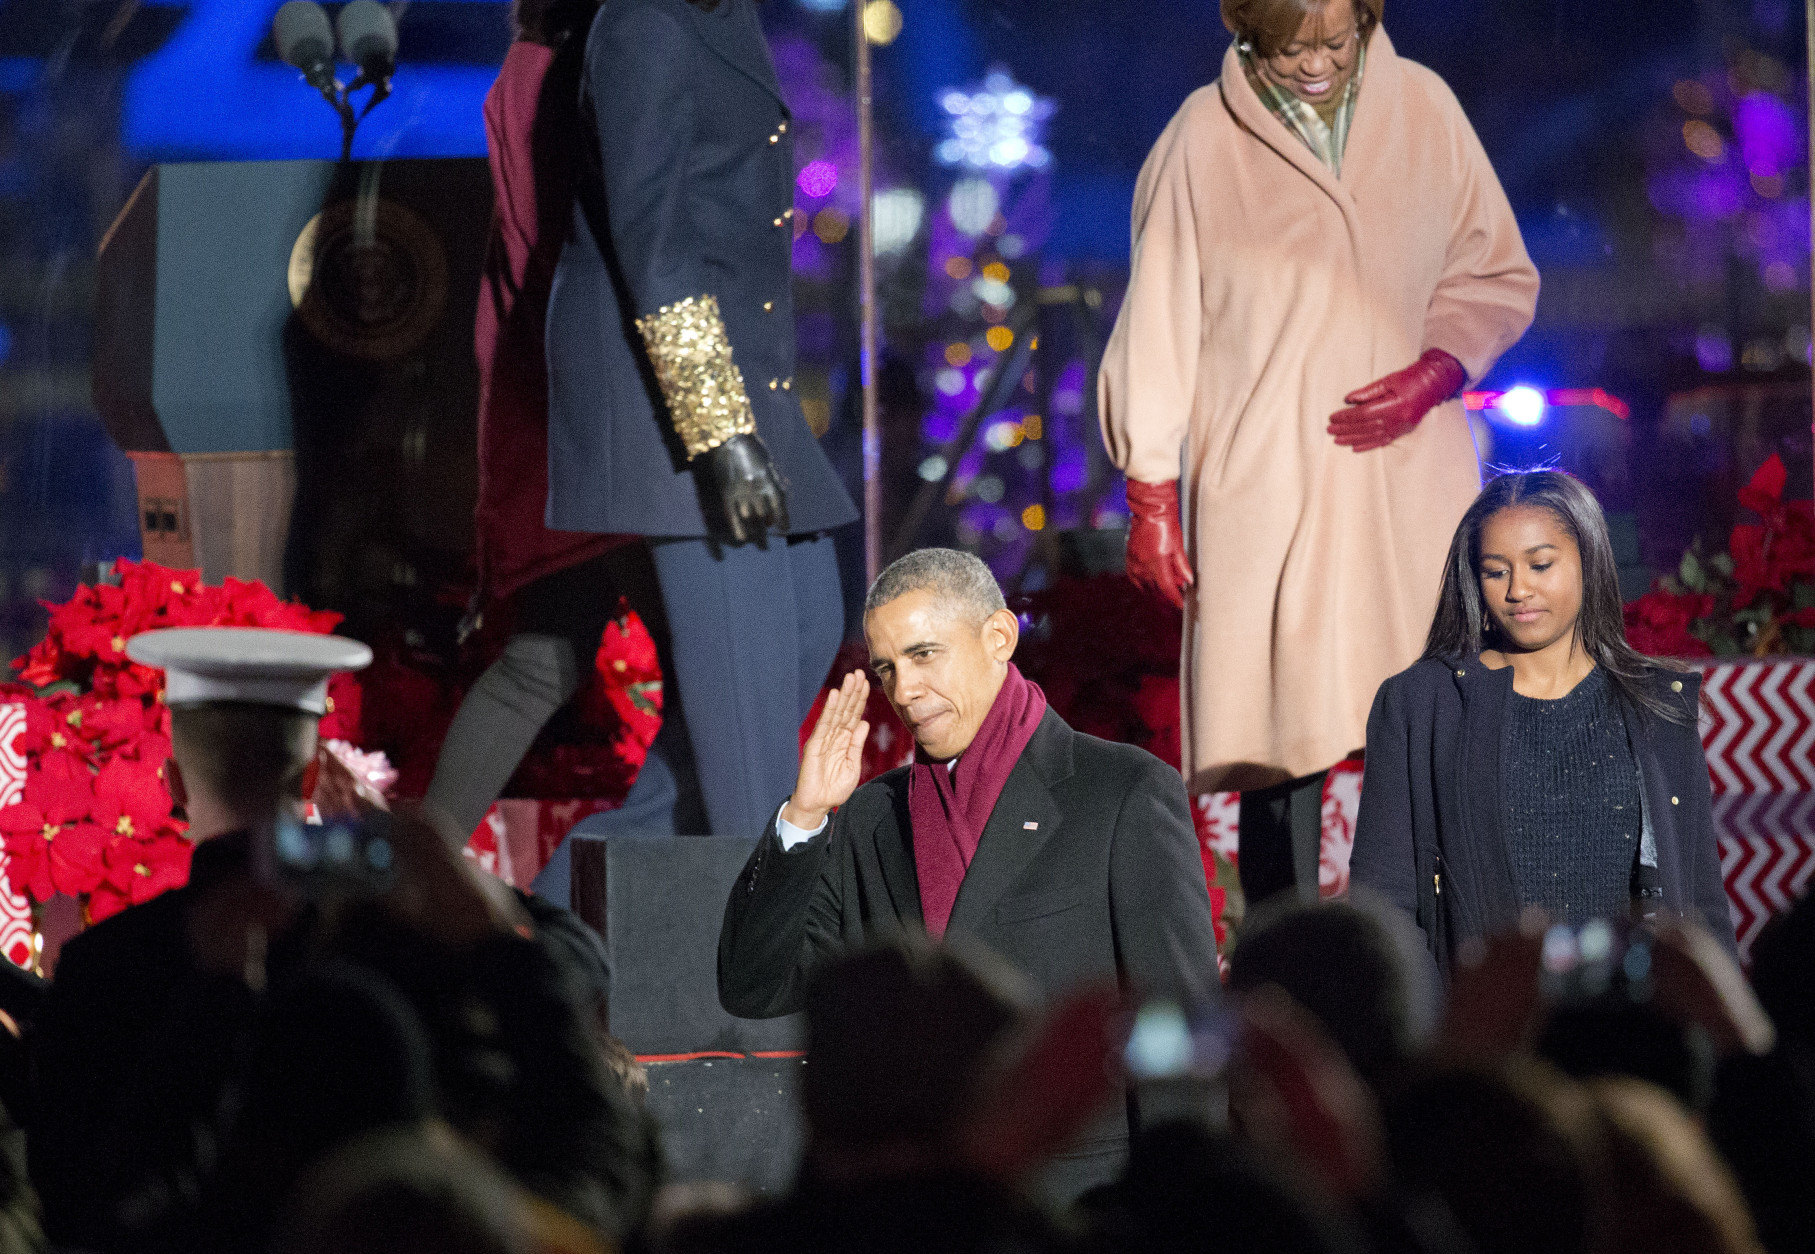 President Barack Obama returns a salute from members of the military as he walks off stage with his daughter Sasha and his mother-in-law Marian Robinson during the National Christmas Tree Lighting ceremony at the Ellipse in Washington, Thursday, Dec. 3, 2015. (AP Photo/Pablo Martinez Monsivais)